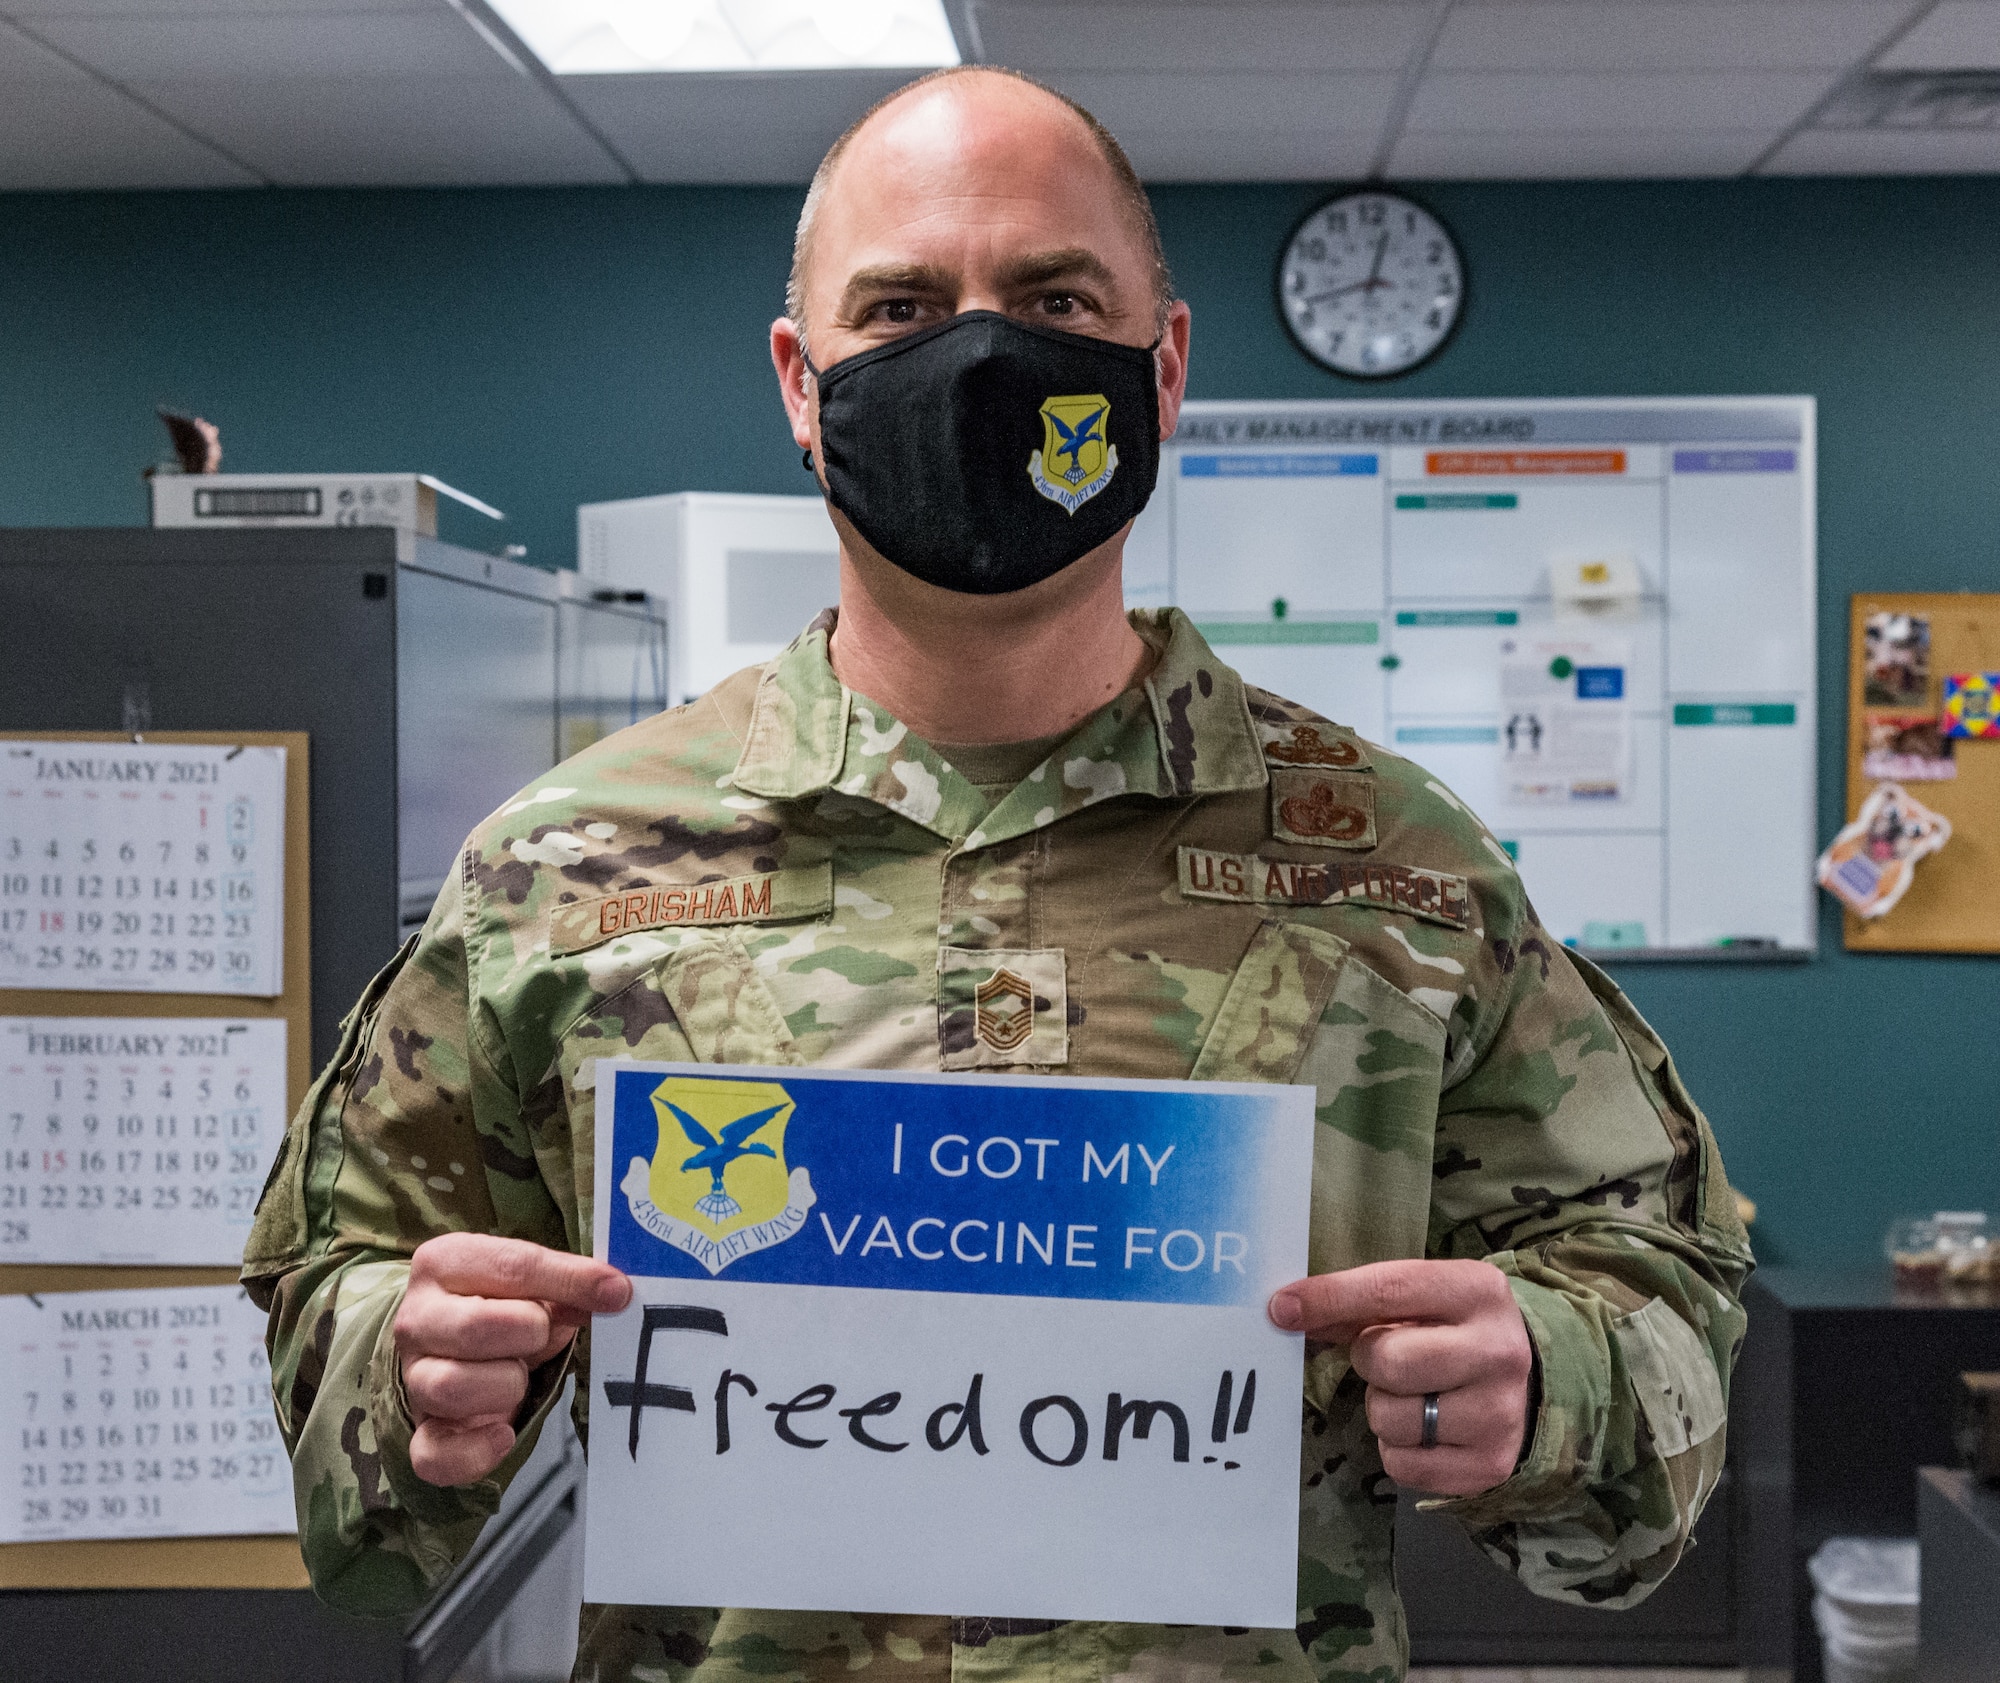 Chief Master Sgt. Jeremiah Grisham, 436th Airlift Wing interim command chief, displays a sign stating why he volunteered for the COVID-19 vaccine Jan. 22, 2021, at Dover Air Force Base, Delaware. Grisham was among the first Team Dover senior leaders who voluntarily received the vaccine in accordance with Department of Defense guidance. The vaccine was granted emergency use authorization by the U.S. Food and Drug Administration for use in prevention of COVID-19. (U.S. Air Force photo by Roland Balik)